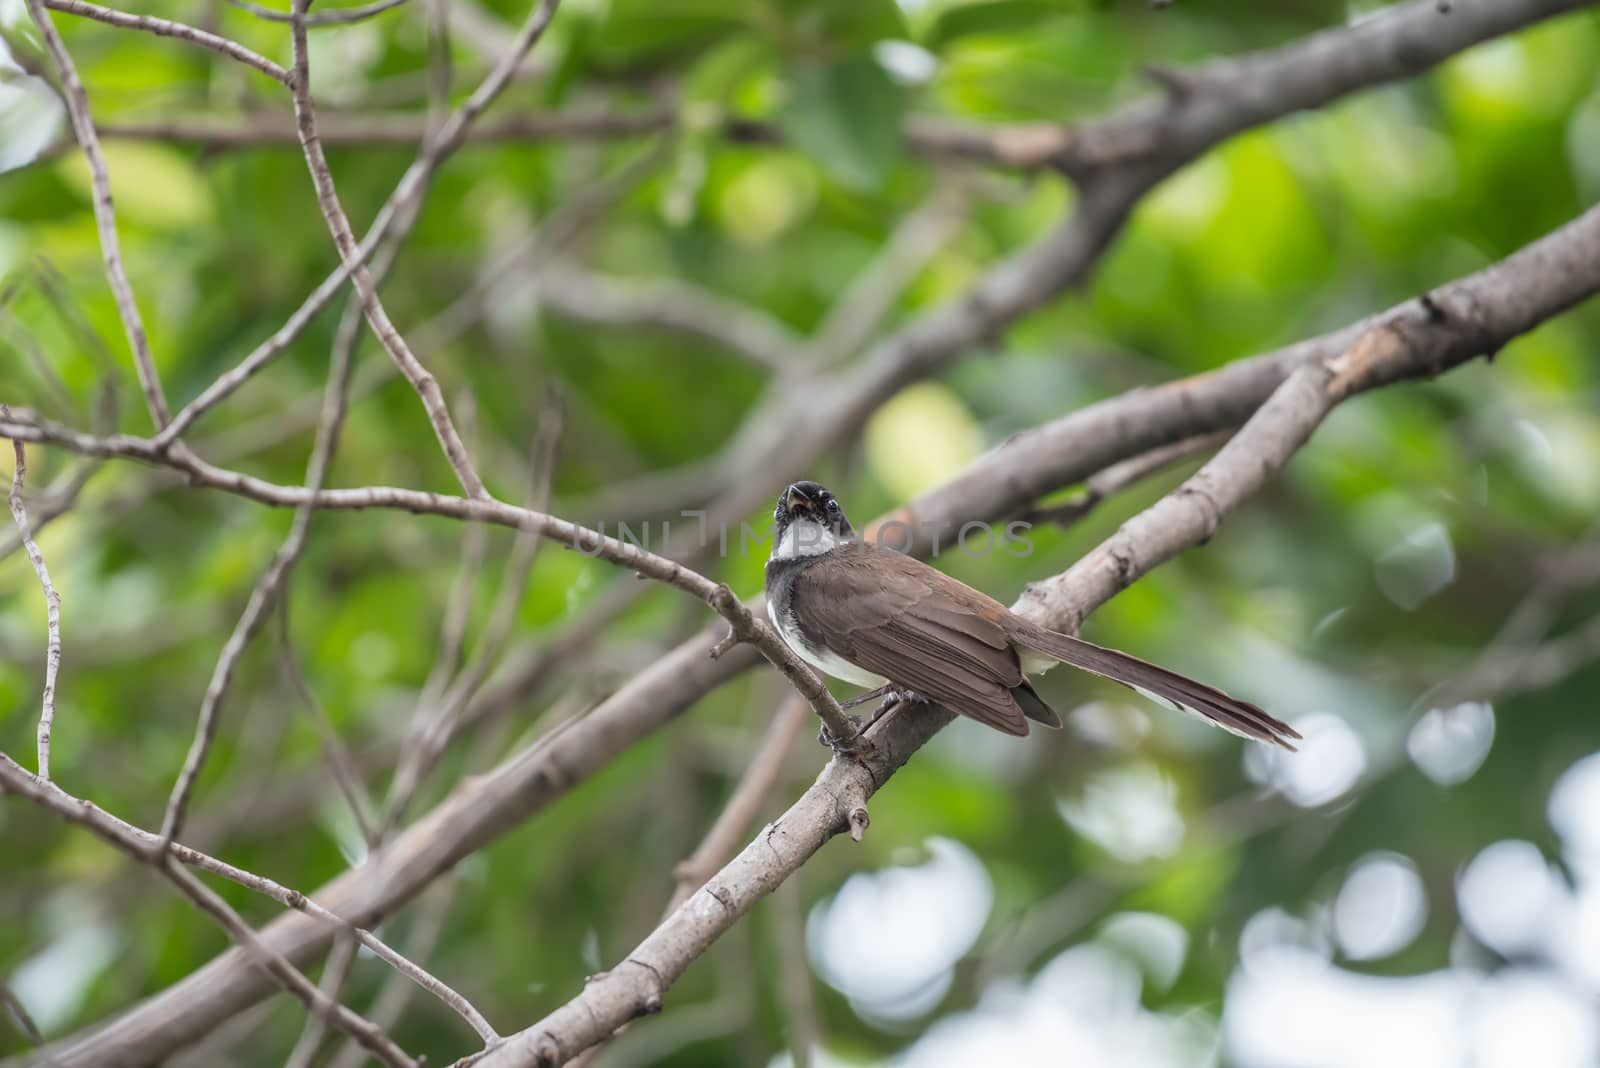 Bird (Malaysian Pied Fantail) in a nature wild by PongMoji